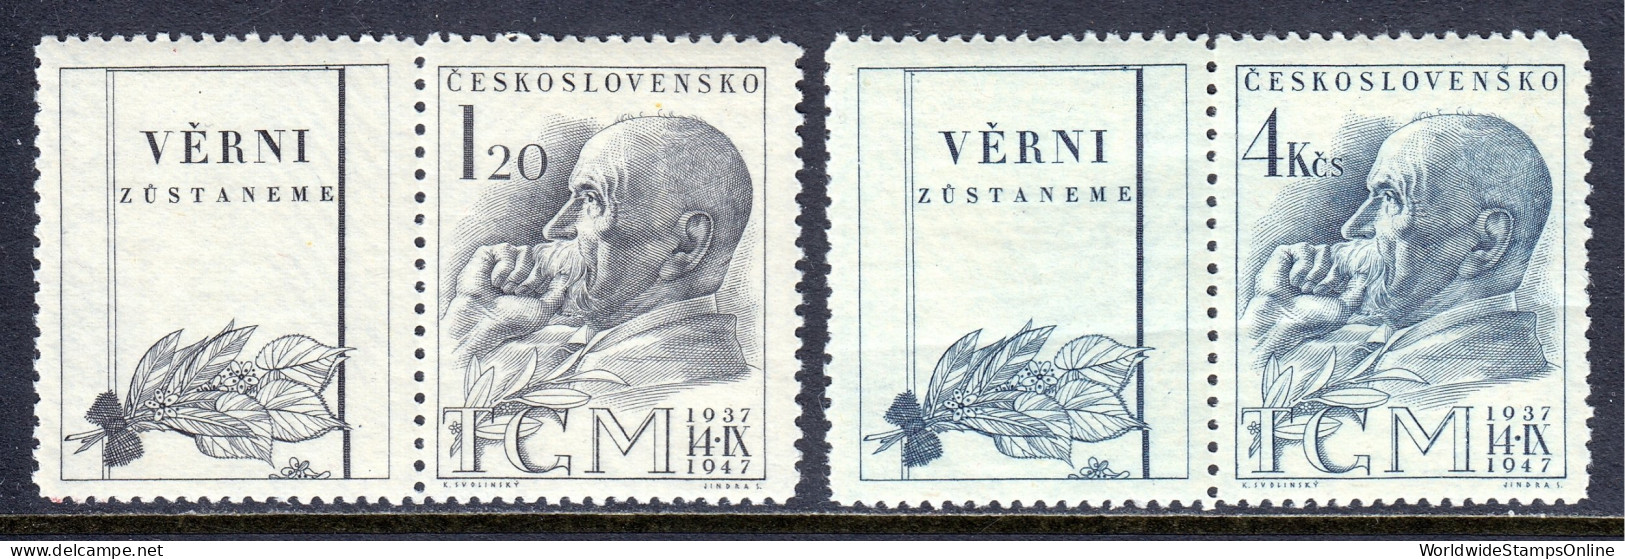 Czechoslovakia - Scott #334-335 - MNH - With Labels, See Desc. - SCV $7.50 - Unused Stamps